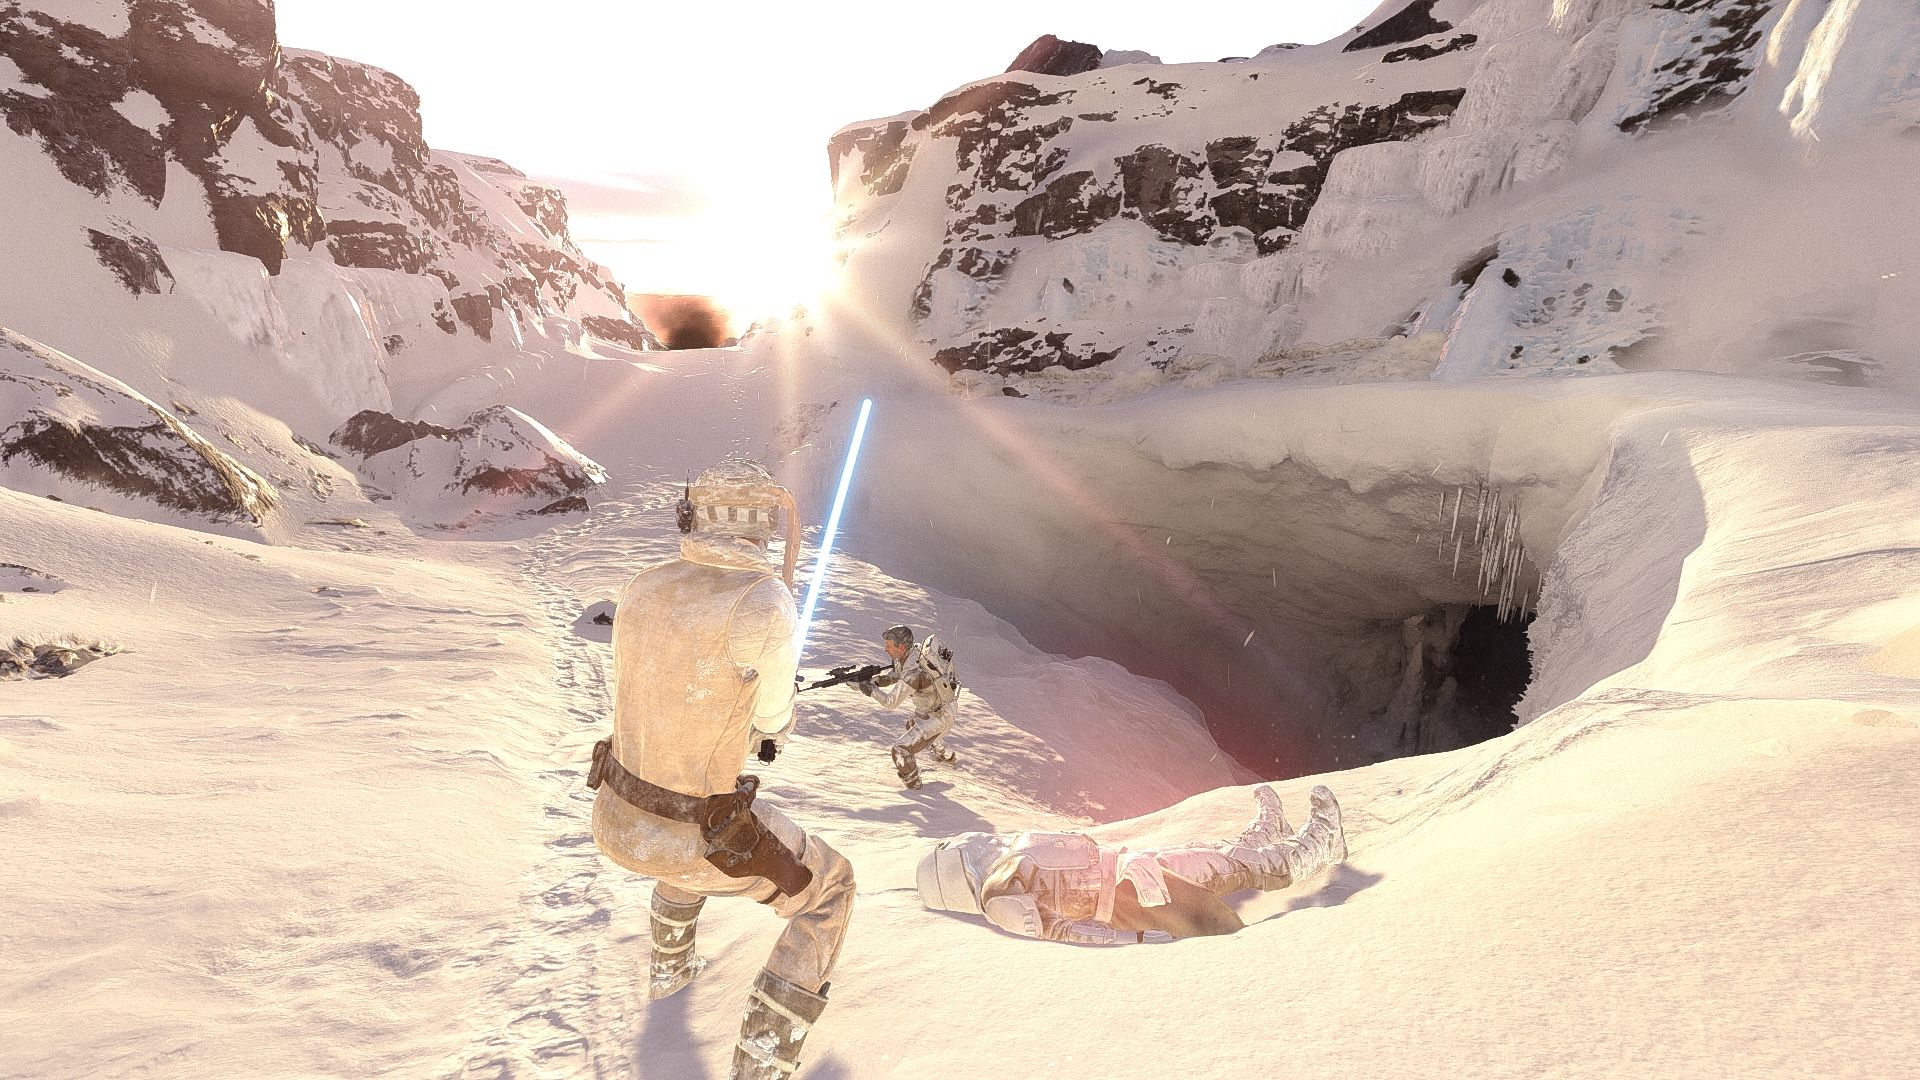 Jedi standing in front of cave entrance with Ally trooper in front and dead stormtrooper in the snow.